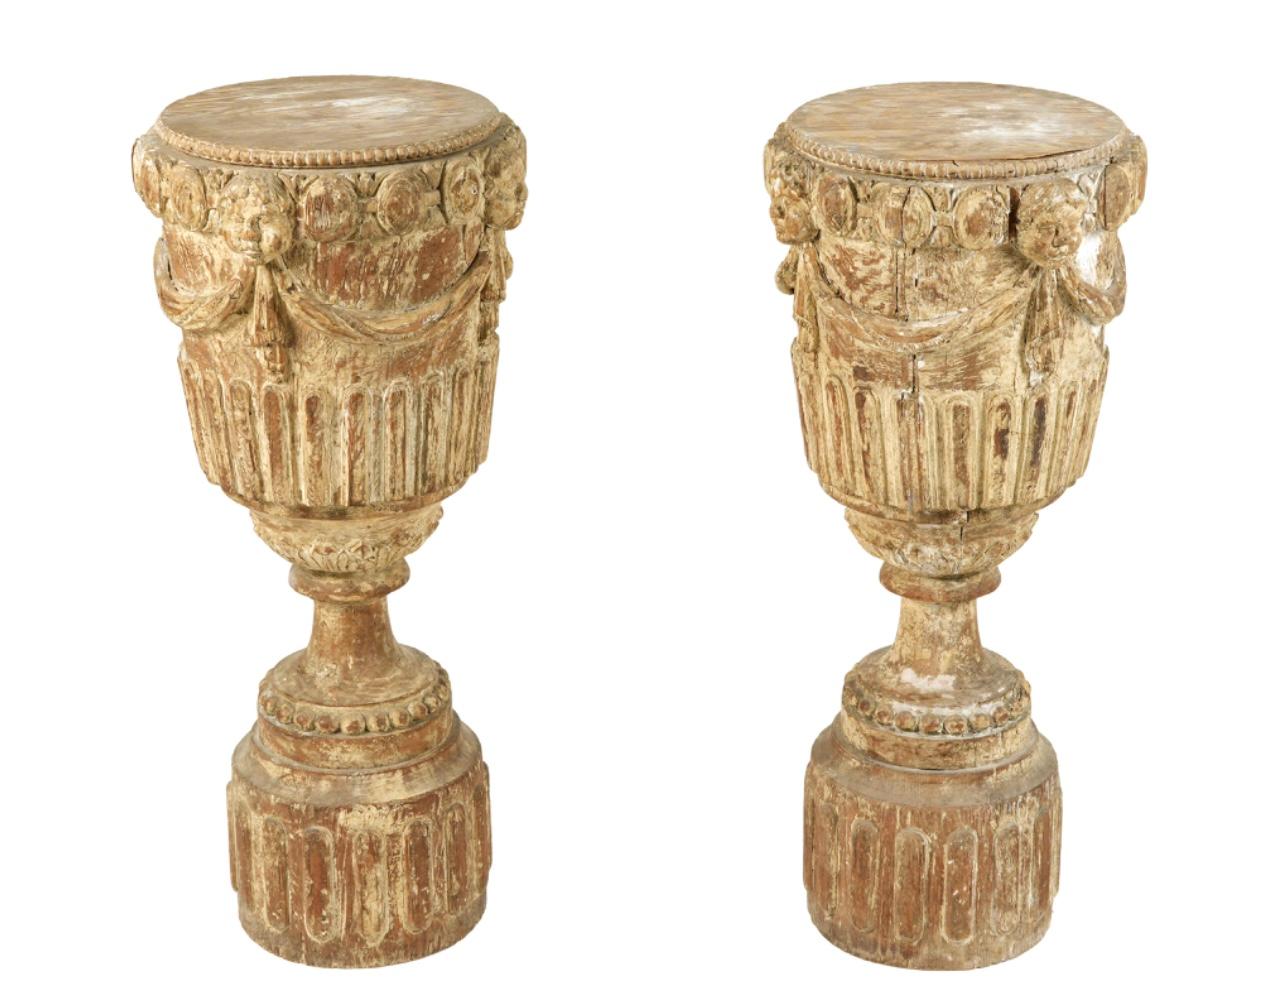 Pair of beautifully crafted 19th century Italian carved wood pedestals. Pedestals feature urn form tops with wonderfully carved tapestry swags, cherubic masks, and fluted lower section on a round base. Worn to the perfect patina these would be ideal